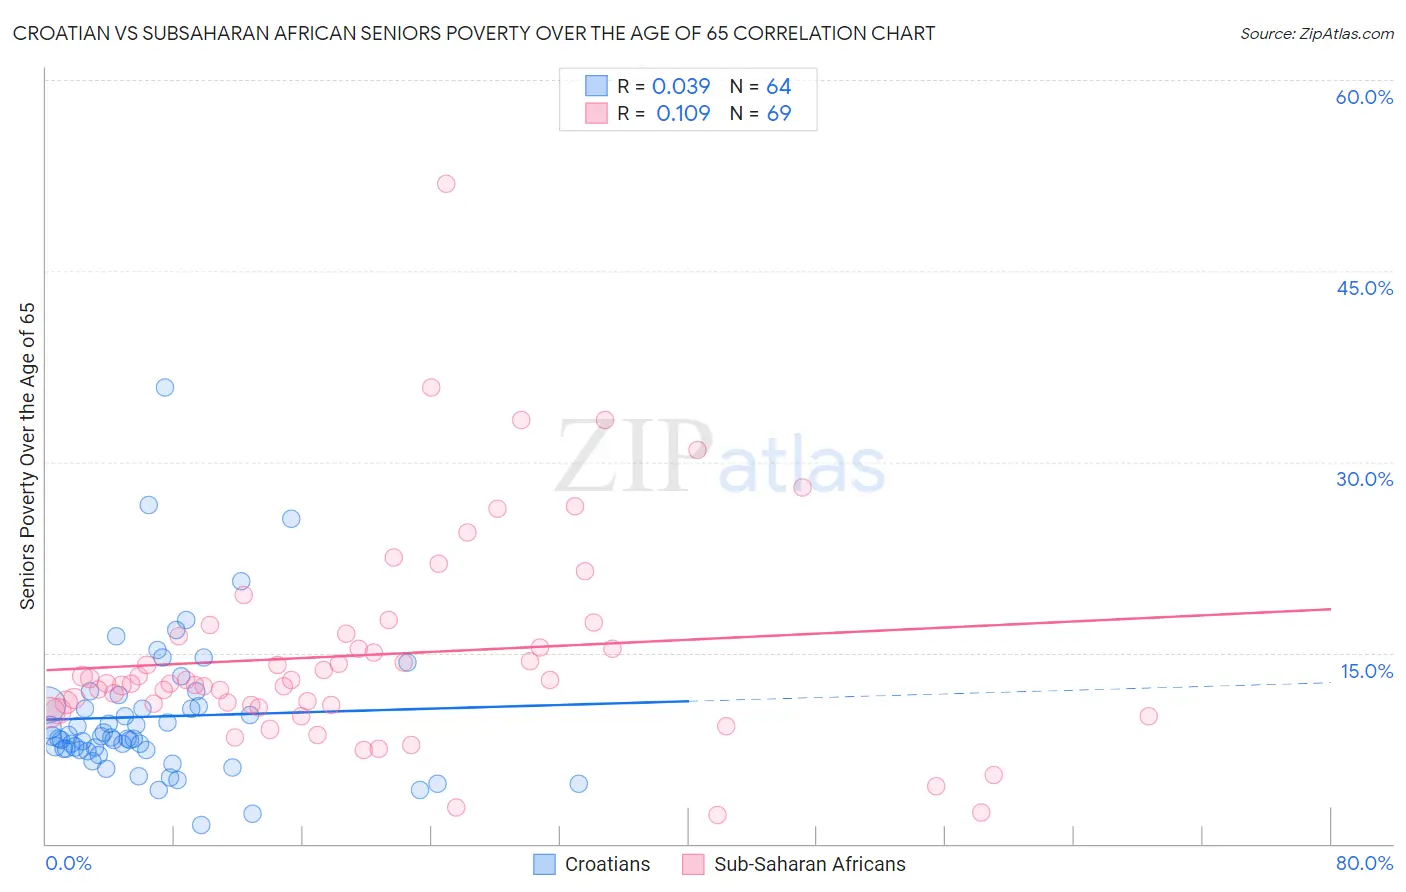 Croatian vs Subsaharan African Seniors Poverty Over the Age of 65